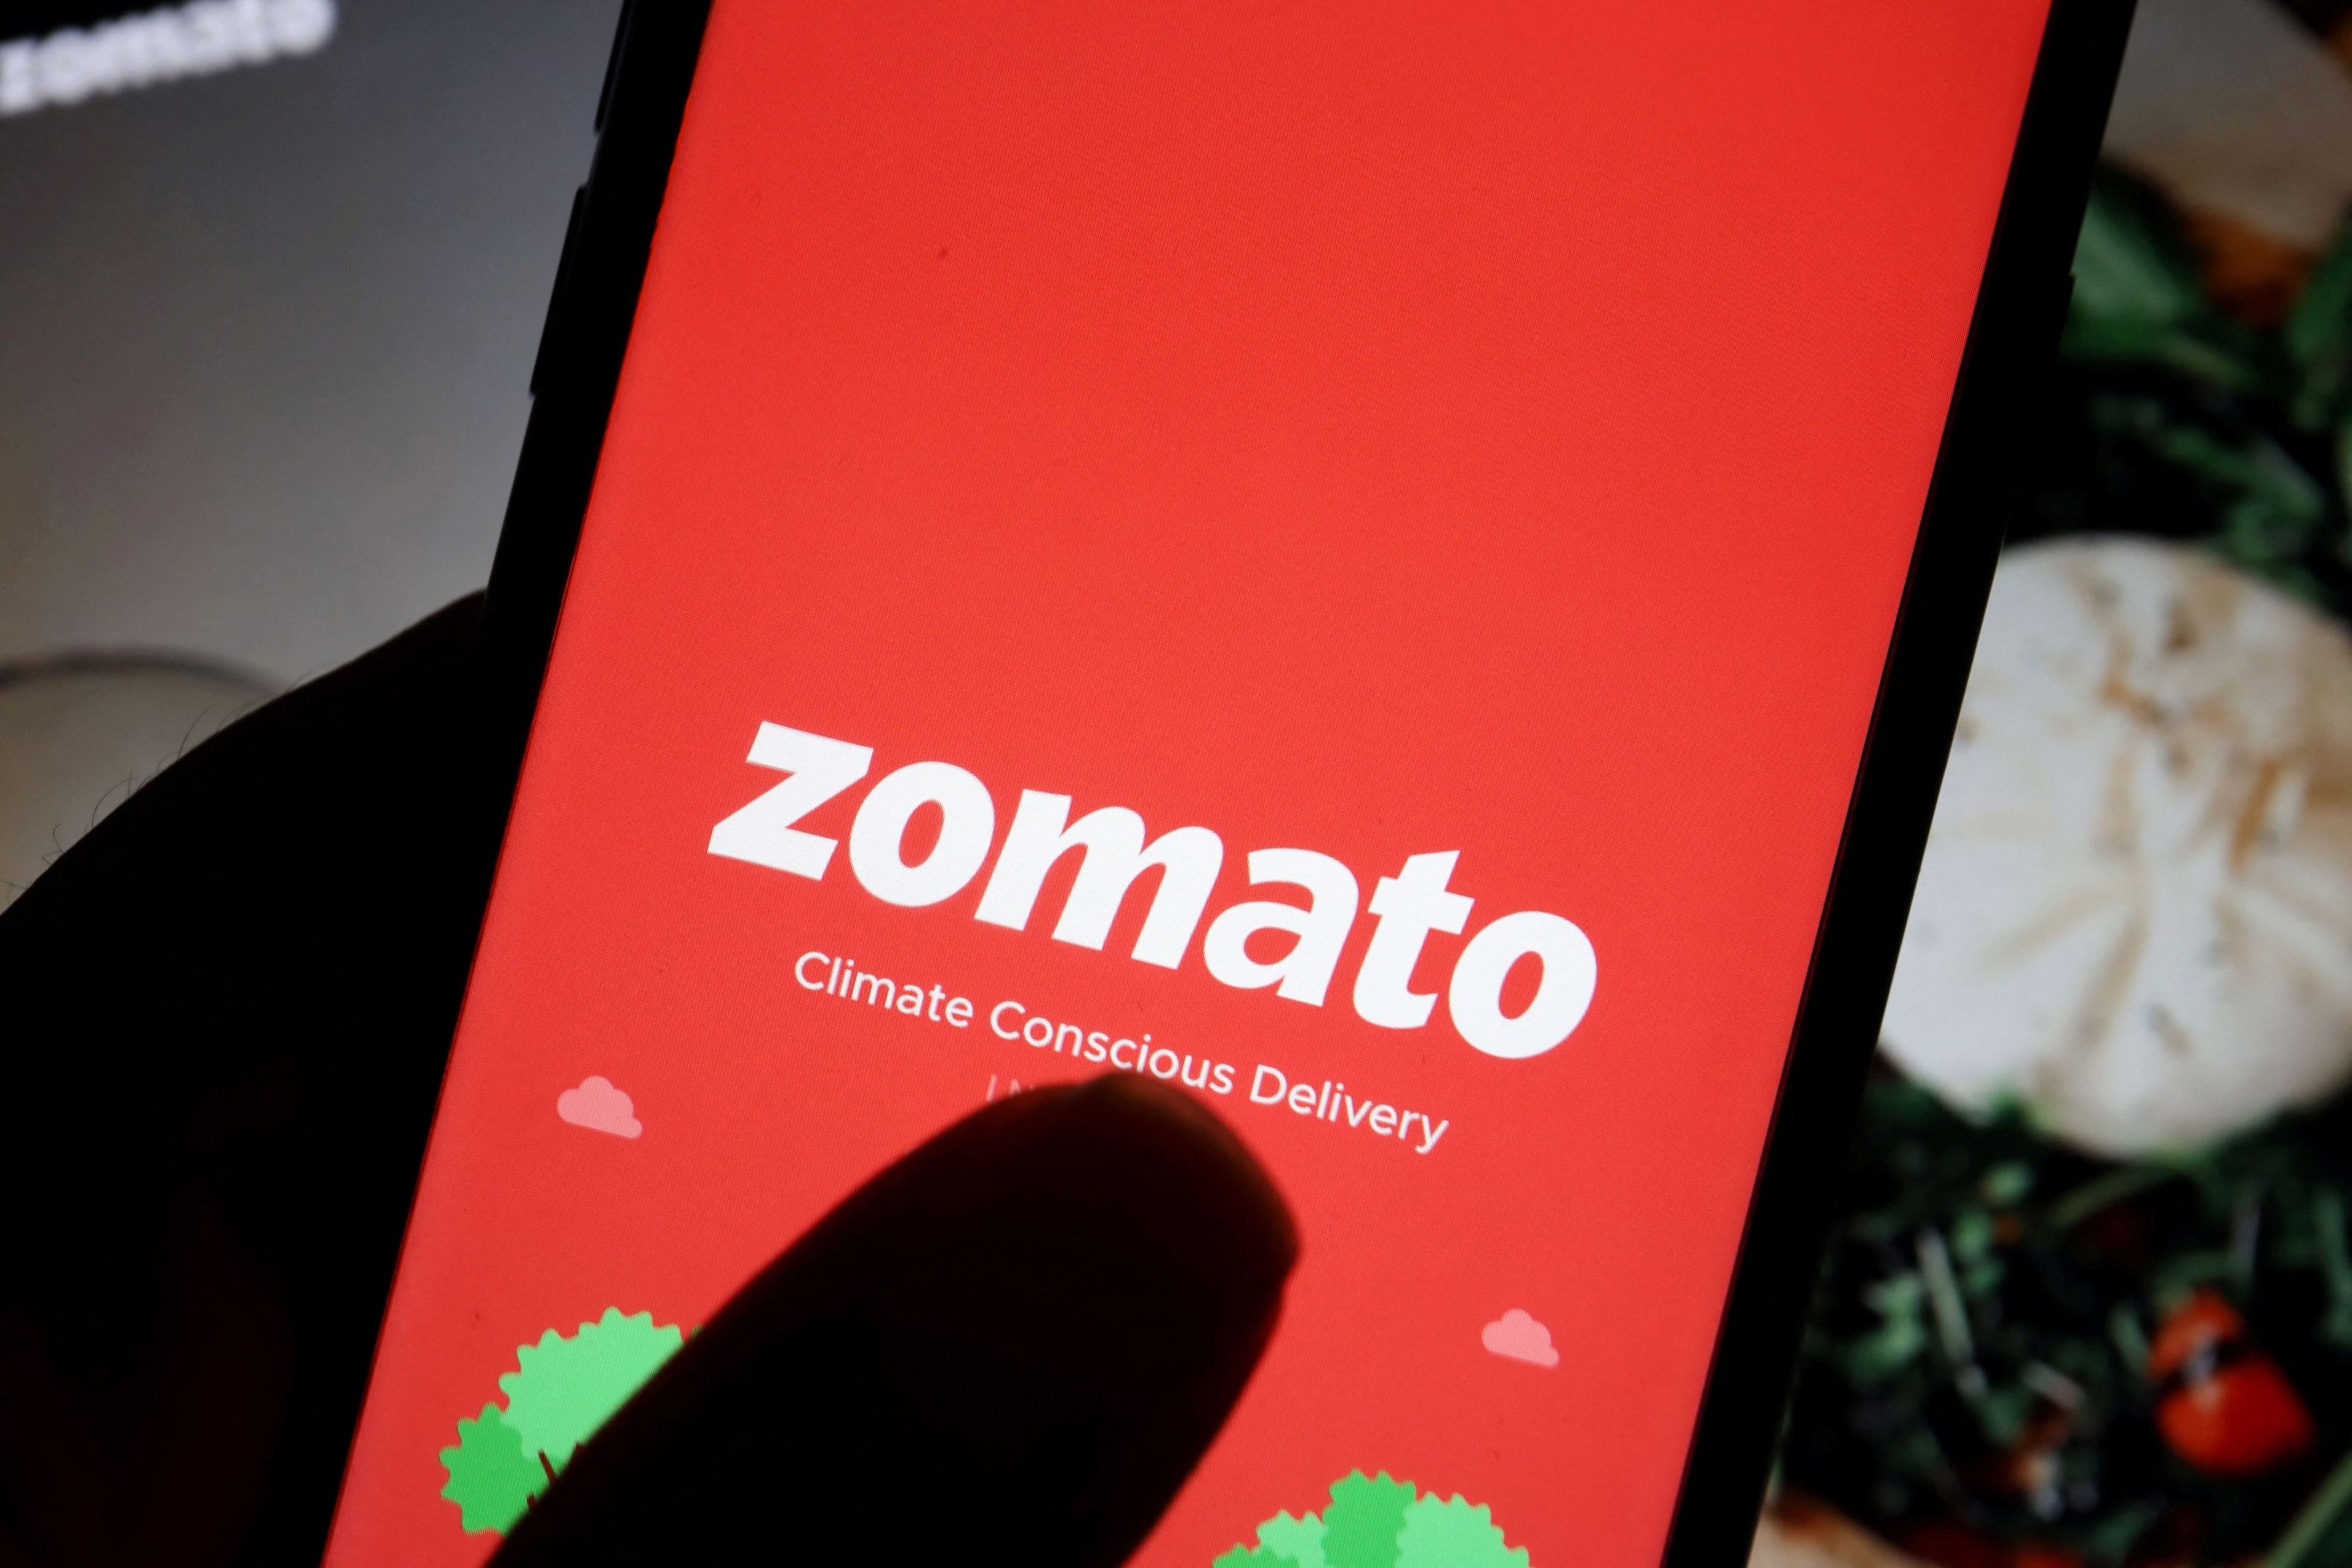 FILE PHOTO: The logo of Indian food delivery company Zomato is seen on its app on a mobile phone displayed in front of its company website in this illustration picture taken July 14, 2021. REUTERS/Florence Lo/Illustration/File Photo